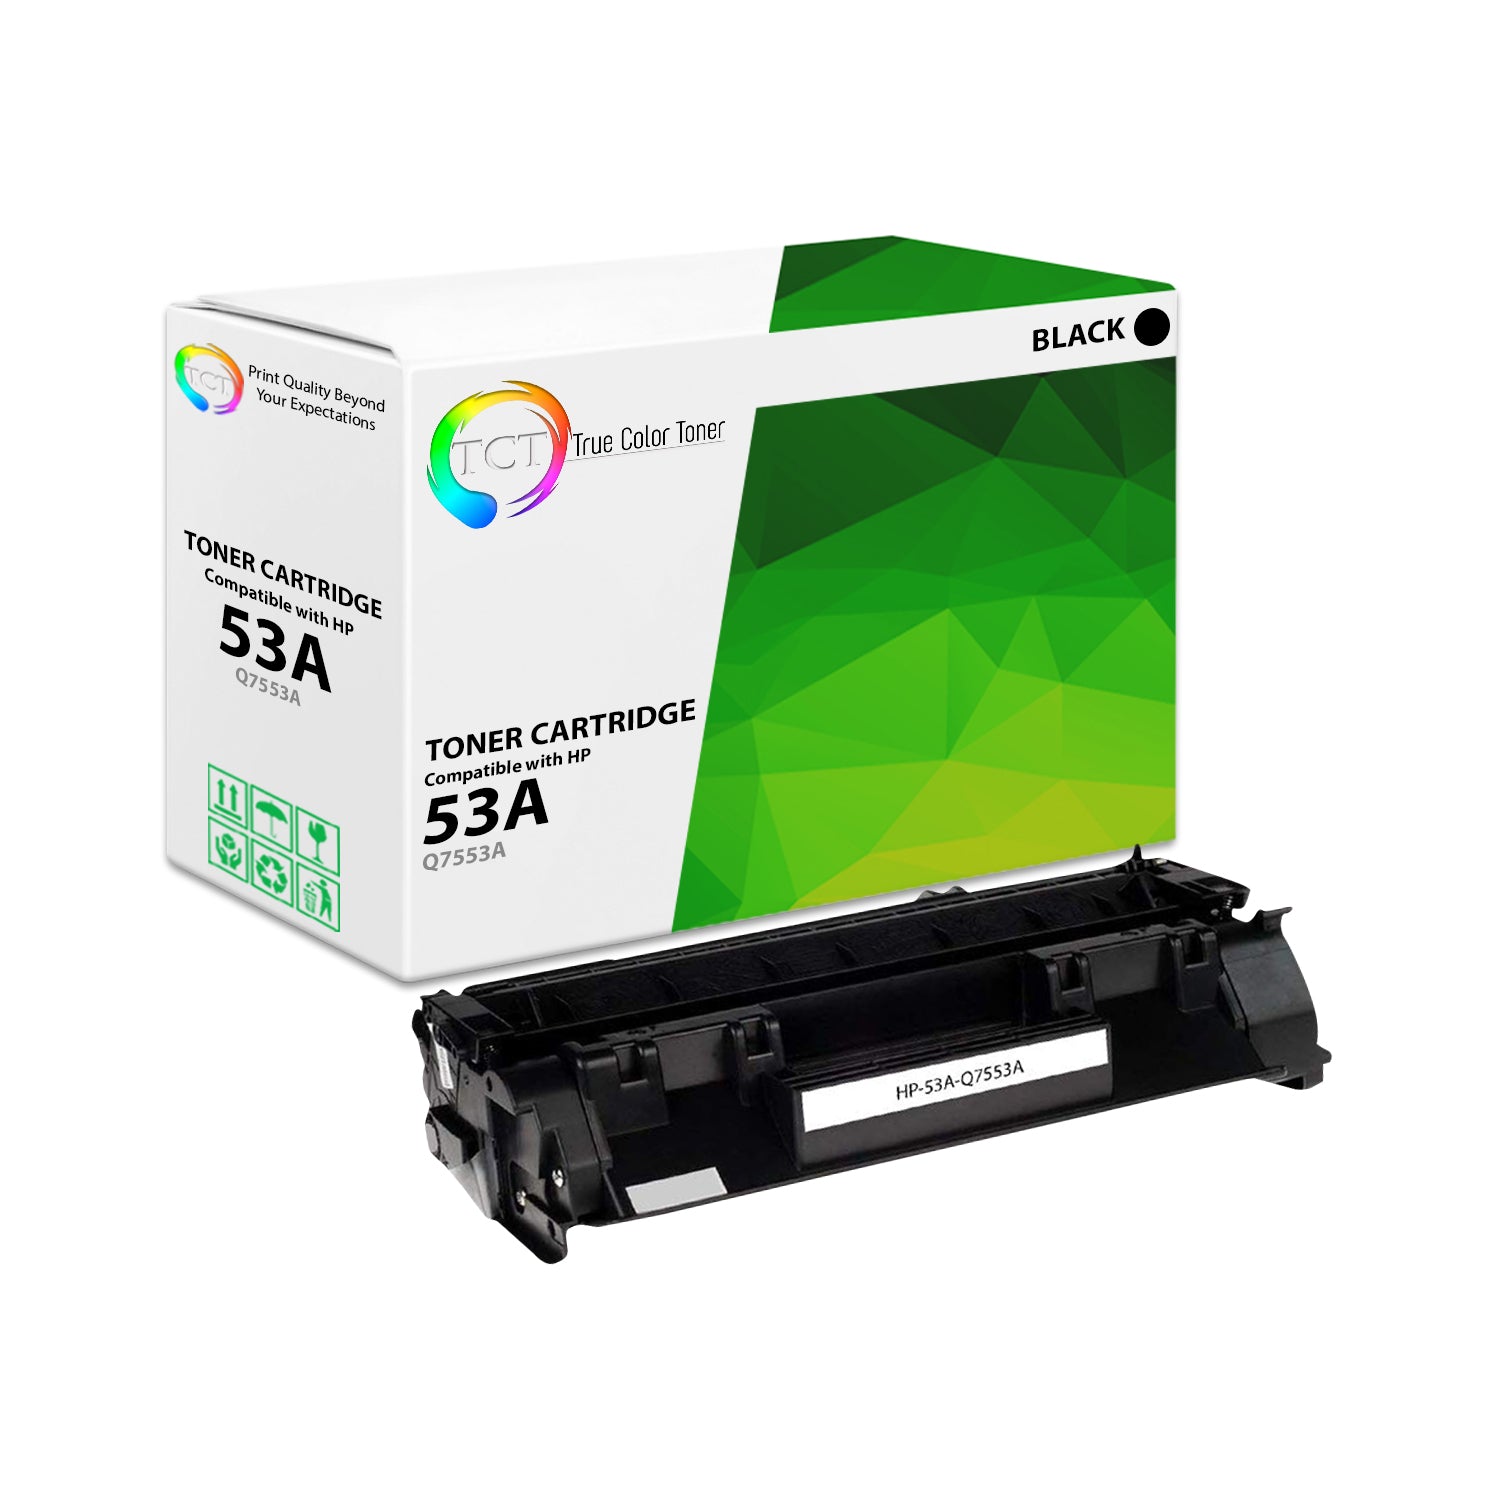 TCT Compatible Toner Cartridge Replacement for the HP 53A Series - 1 Pack Black